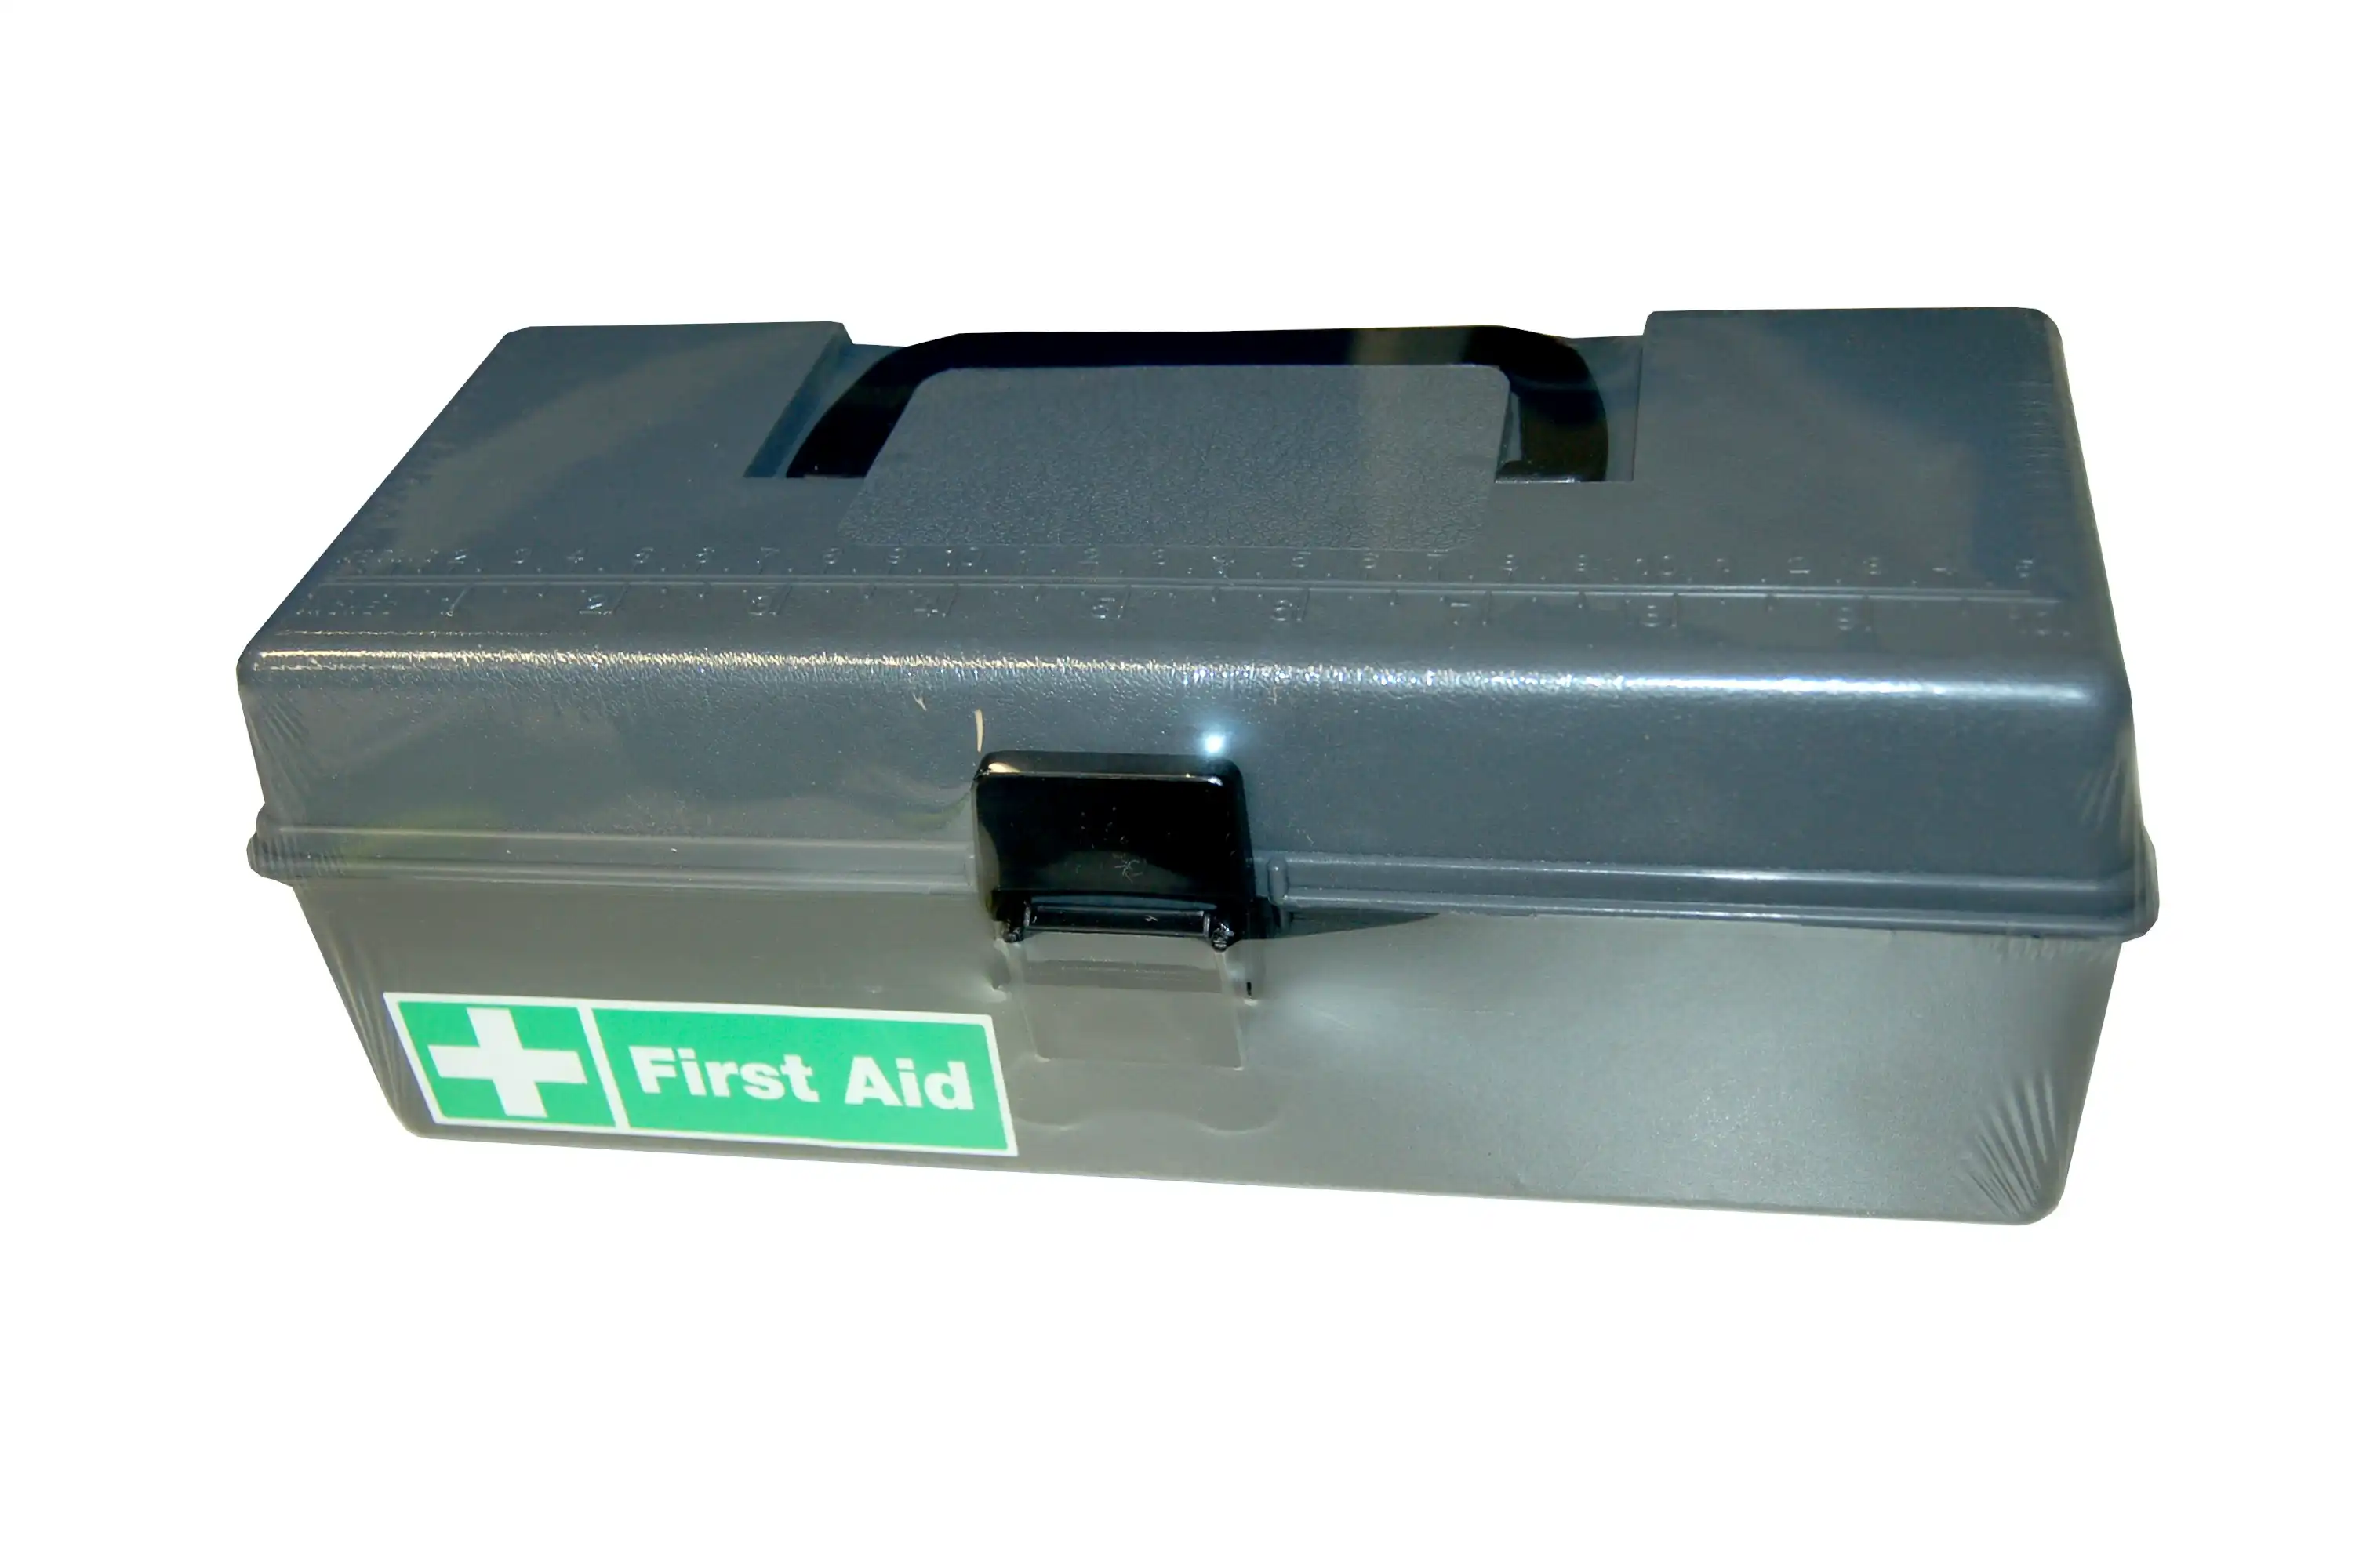 Livingstone First Aid Empty Polypropylene Case 28 x 13 x 10 cm Grey Lid and Black Base with Compartments